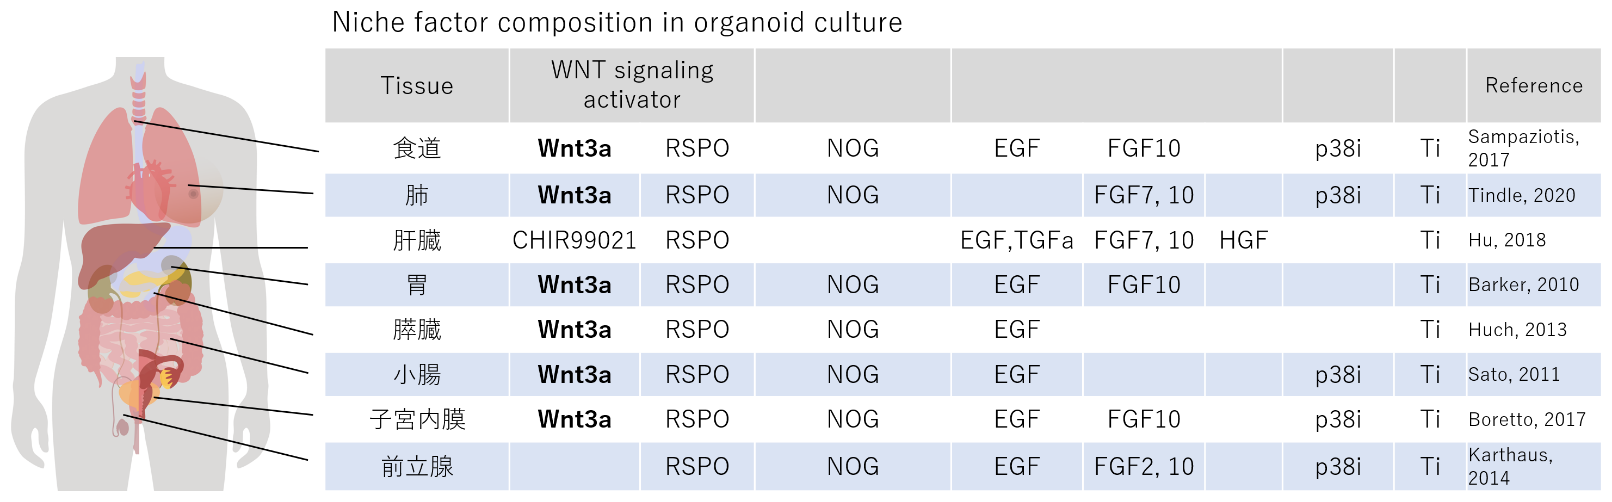 Niche factor composition in organoid culture